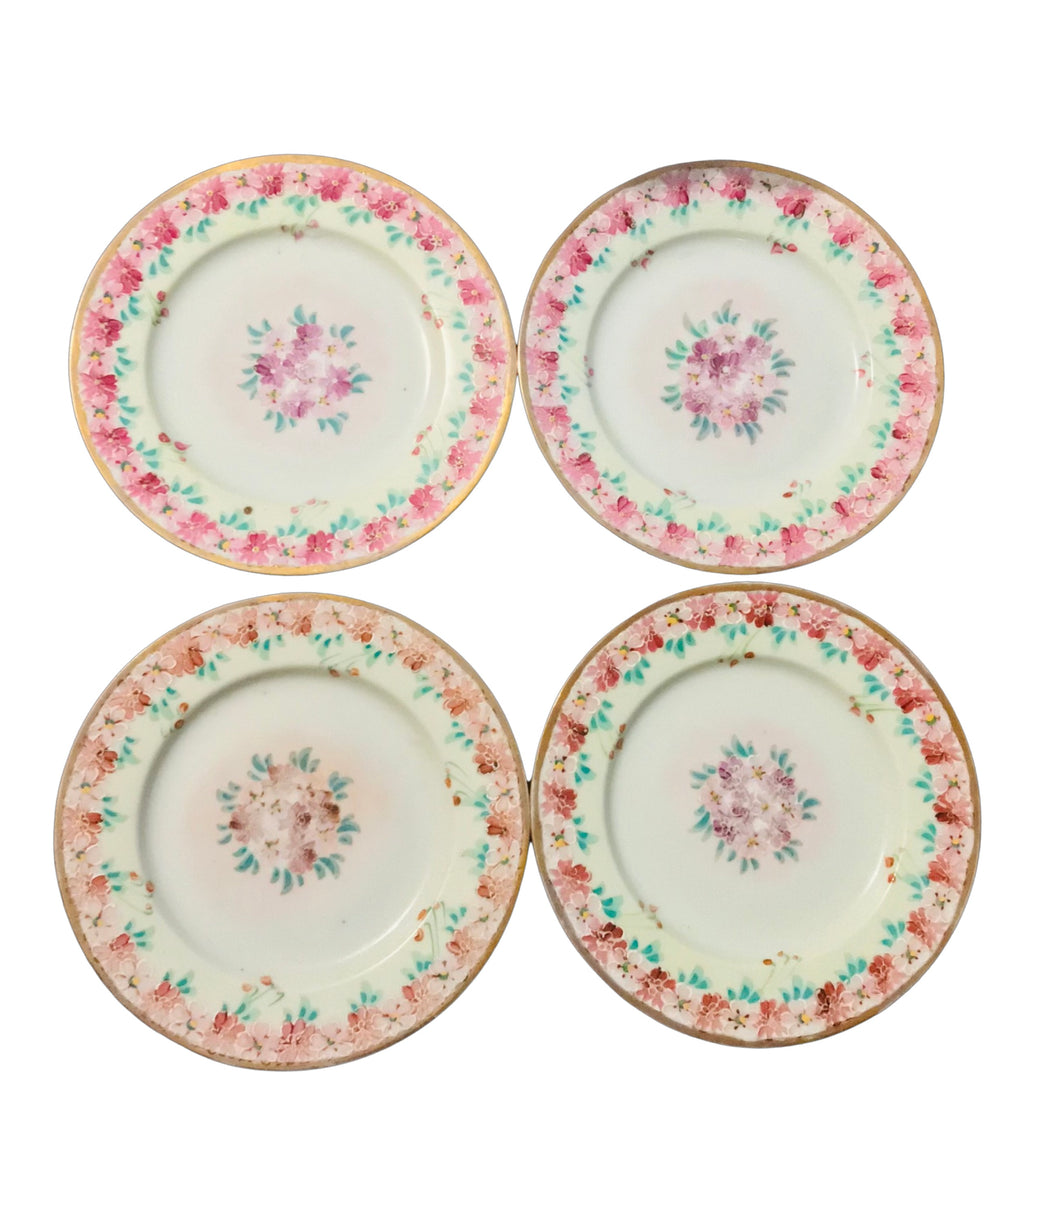 Set of 4 Hand Painted 6 Inch Plates